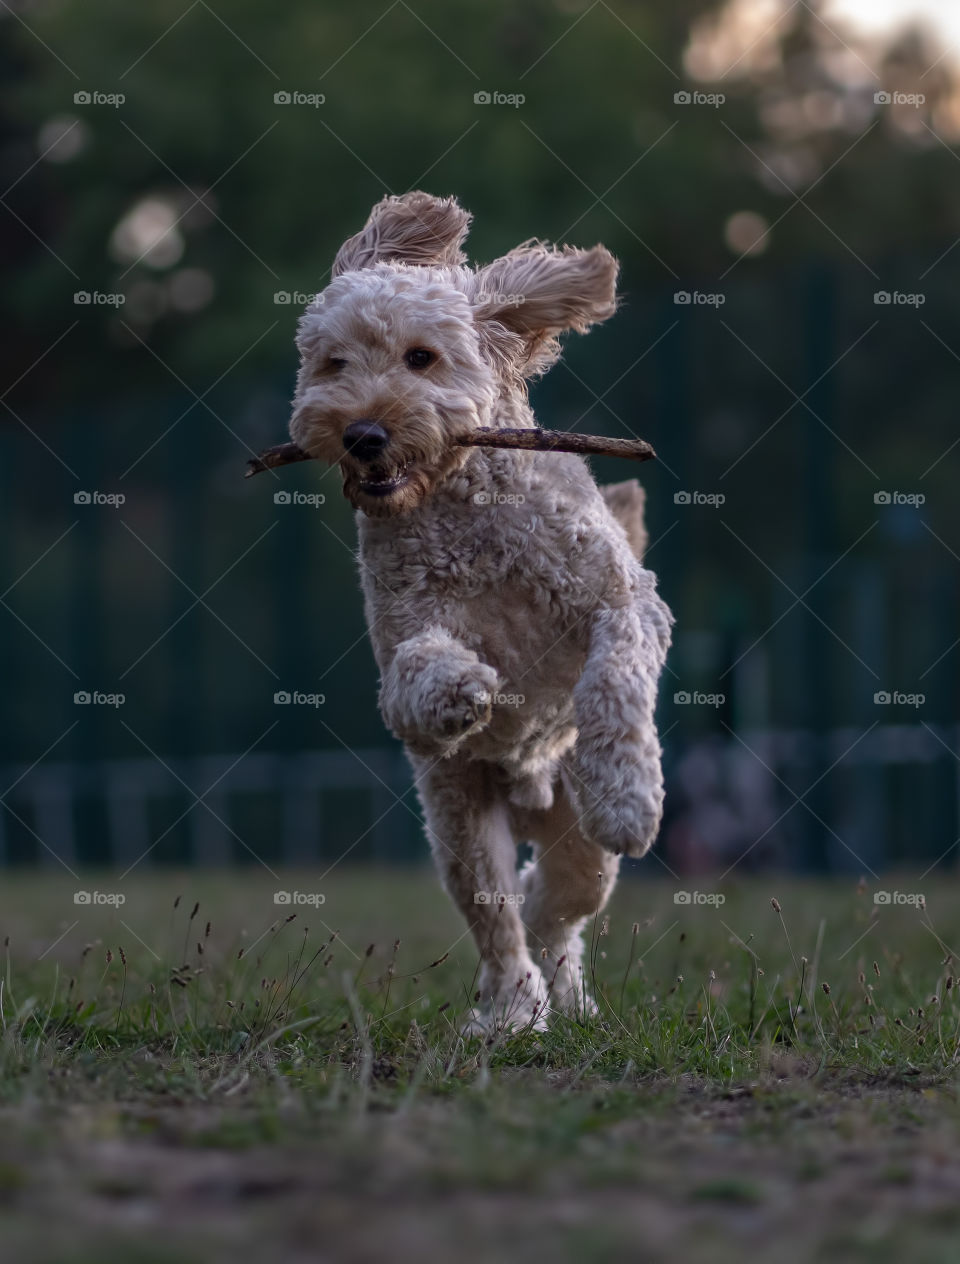 Running with stick